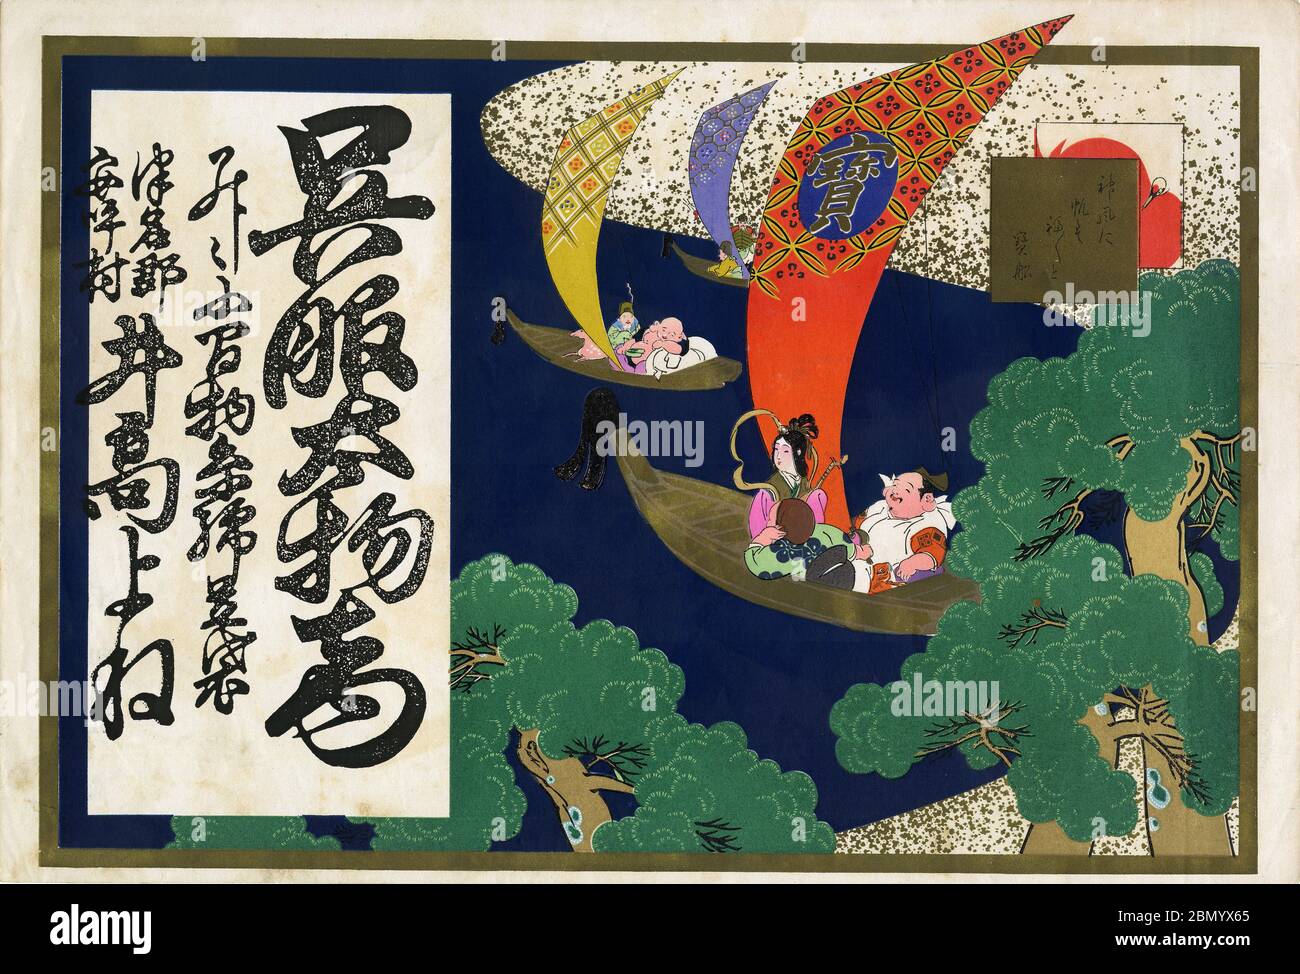 [ 1920s Japan - Seven Gods of Fortune ] —   Hikifuda (引札), a print used as an advertising flyer by local shops. They were popular from the 1800s through the 1920s.  The Seven Gods of Fortune (七福神 Shichi Fukujin) traveling in boats. In the foreground there are pine trees, symbolizing longevity, virtue, rebirth, renewal, and a bright and hopeful future.  20th century vintage advertising flyer. Stock Photo